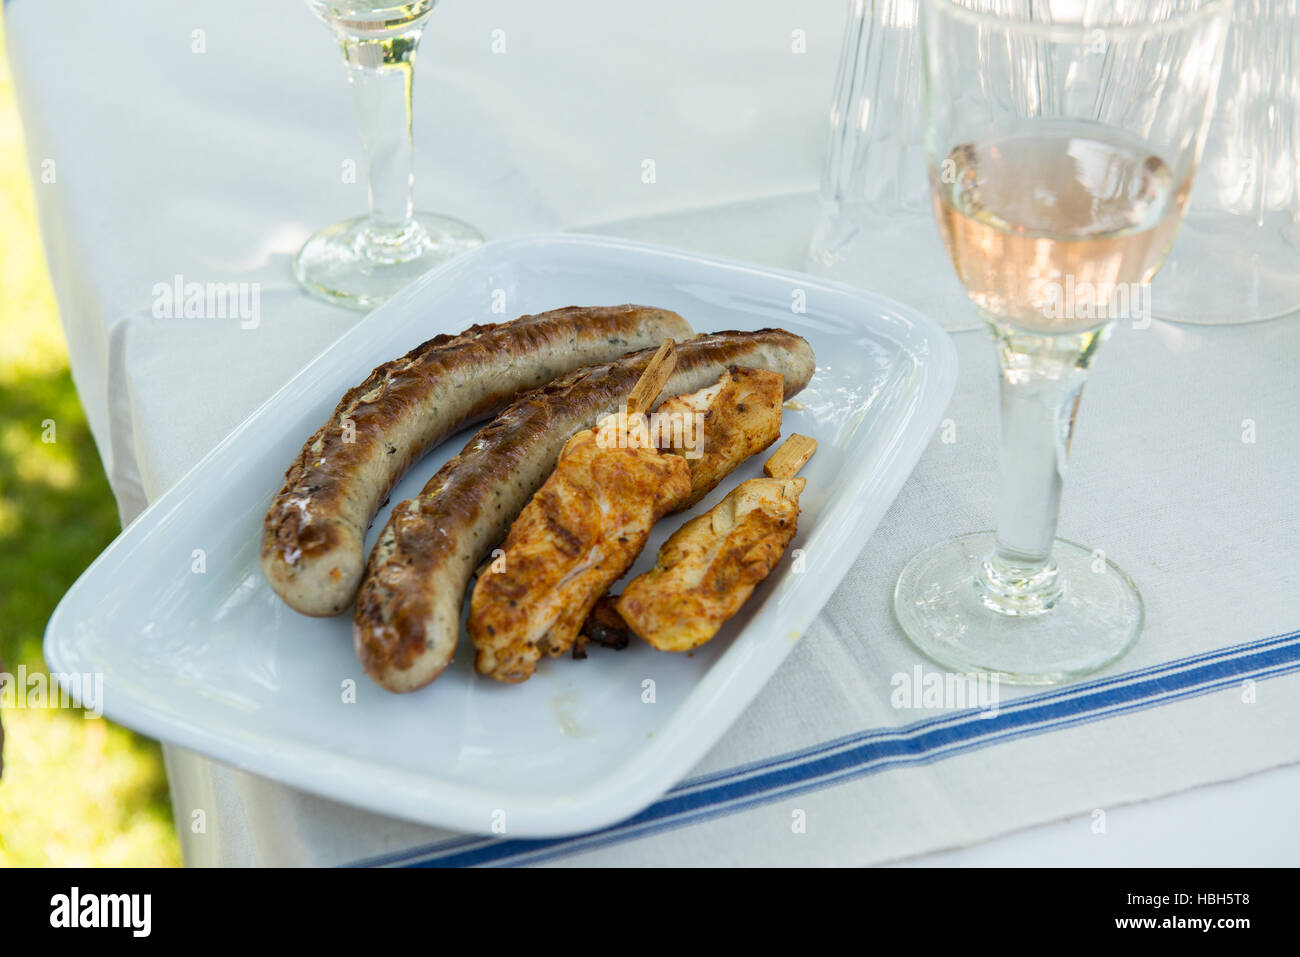 sausages and wine Stock Photo